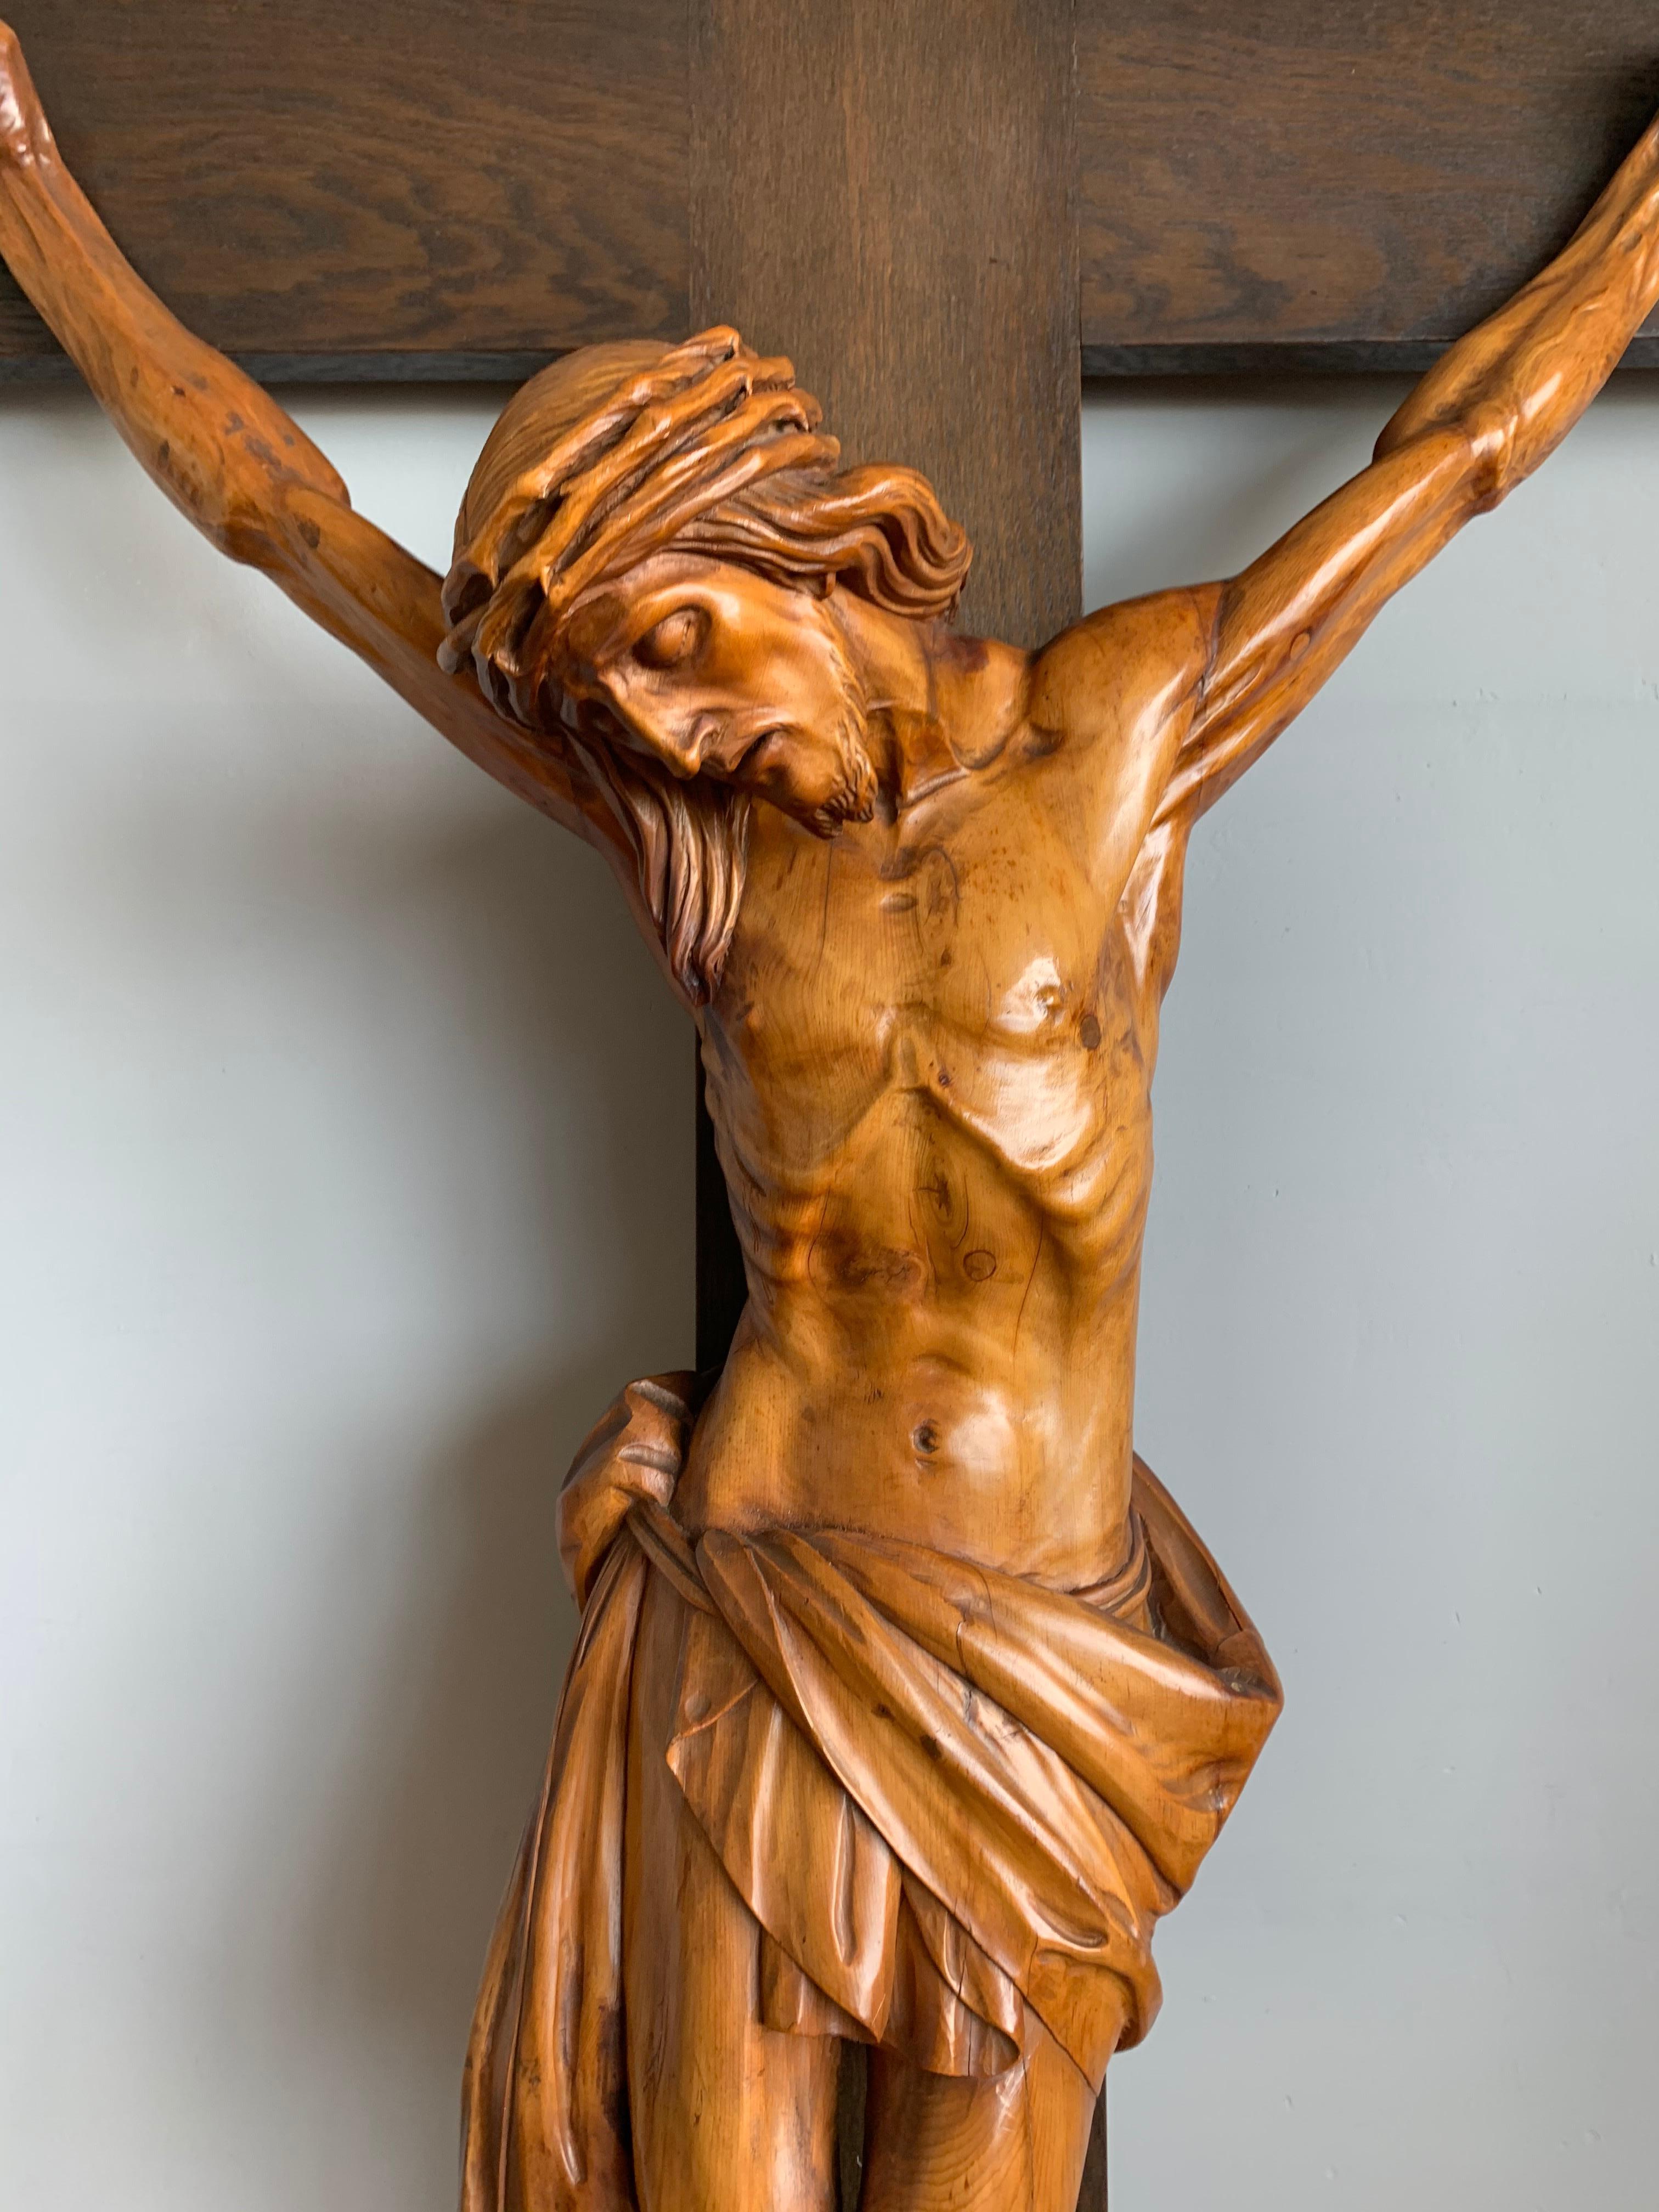 Large antique crucifix with stunning hand carved details and an amazing patina.

This remarkable and large corpus of a deceased Christ on the cross is different to almost all others. The artist who hand-sculpted this impressive work of religious art